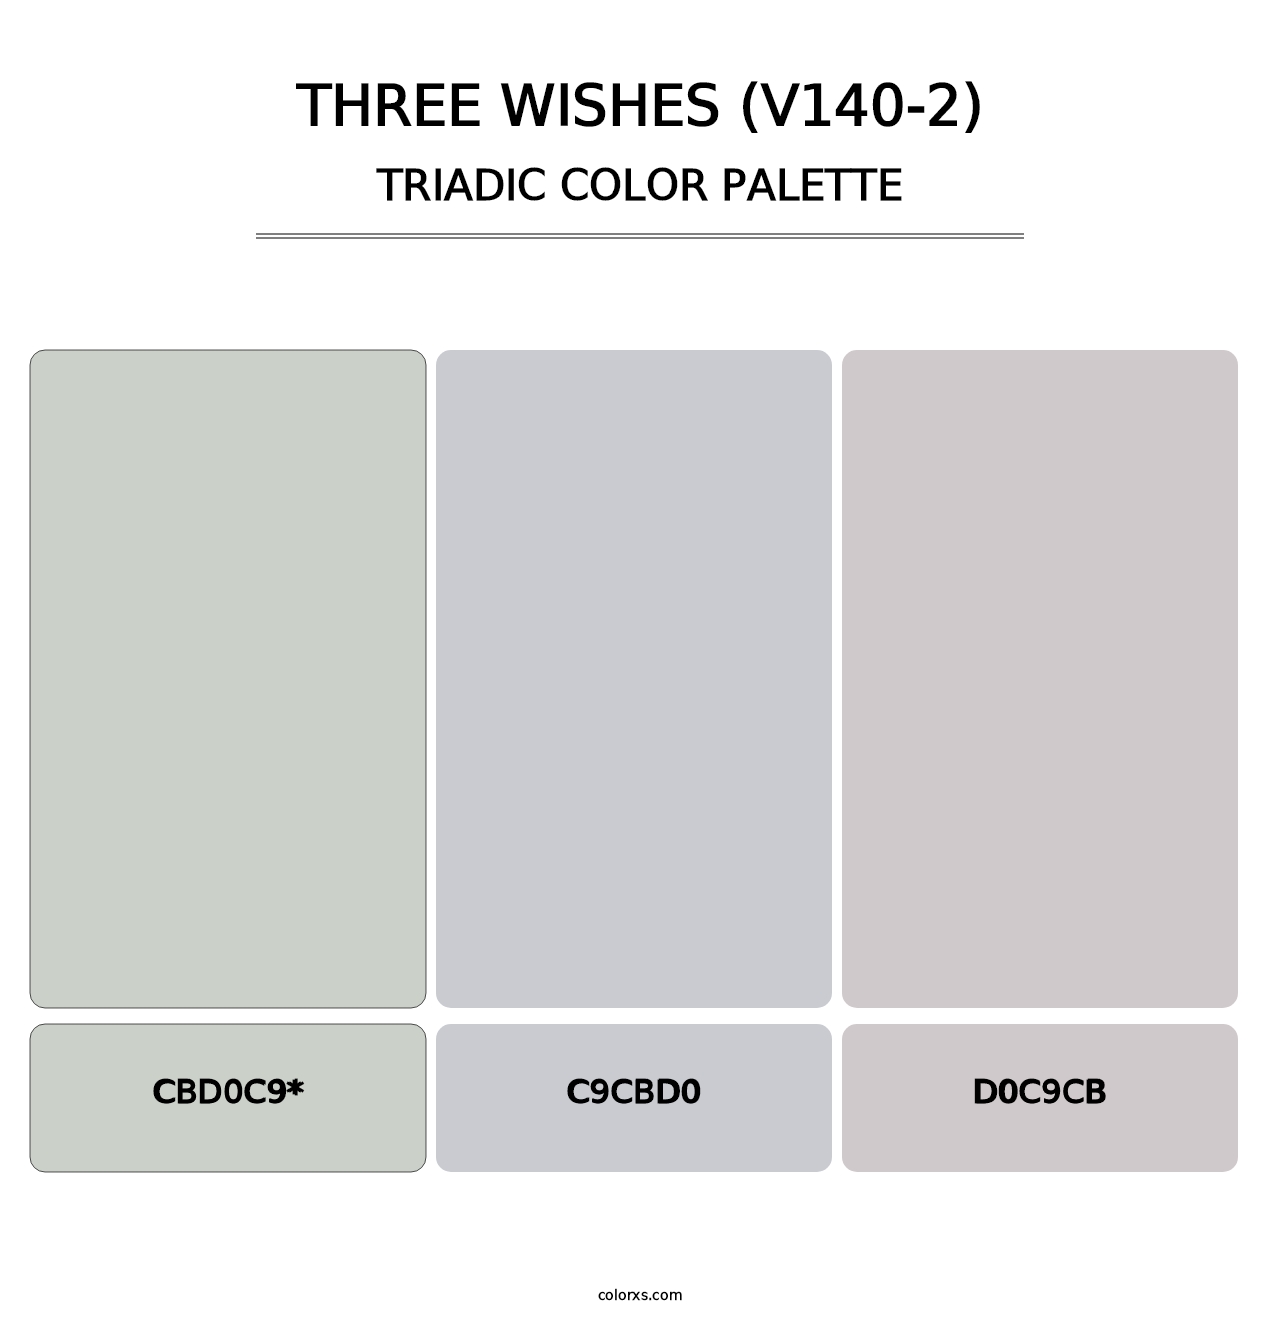 Three Wishes (V140-2) - Triadic Color Palette